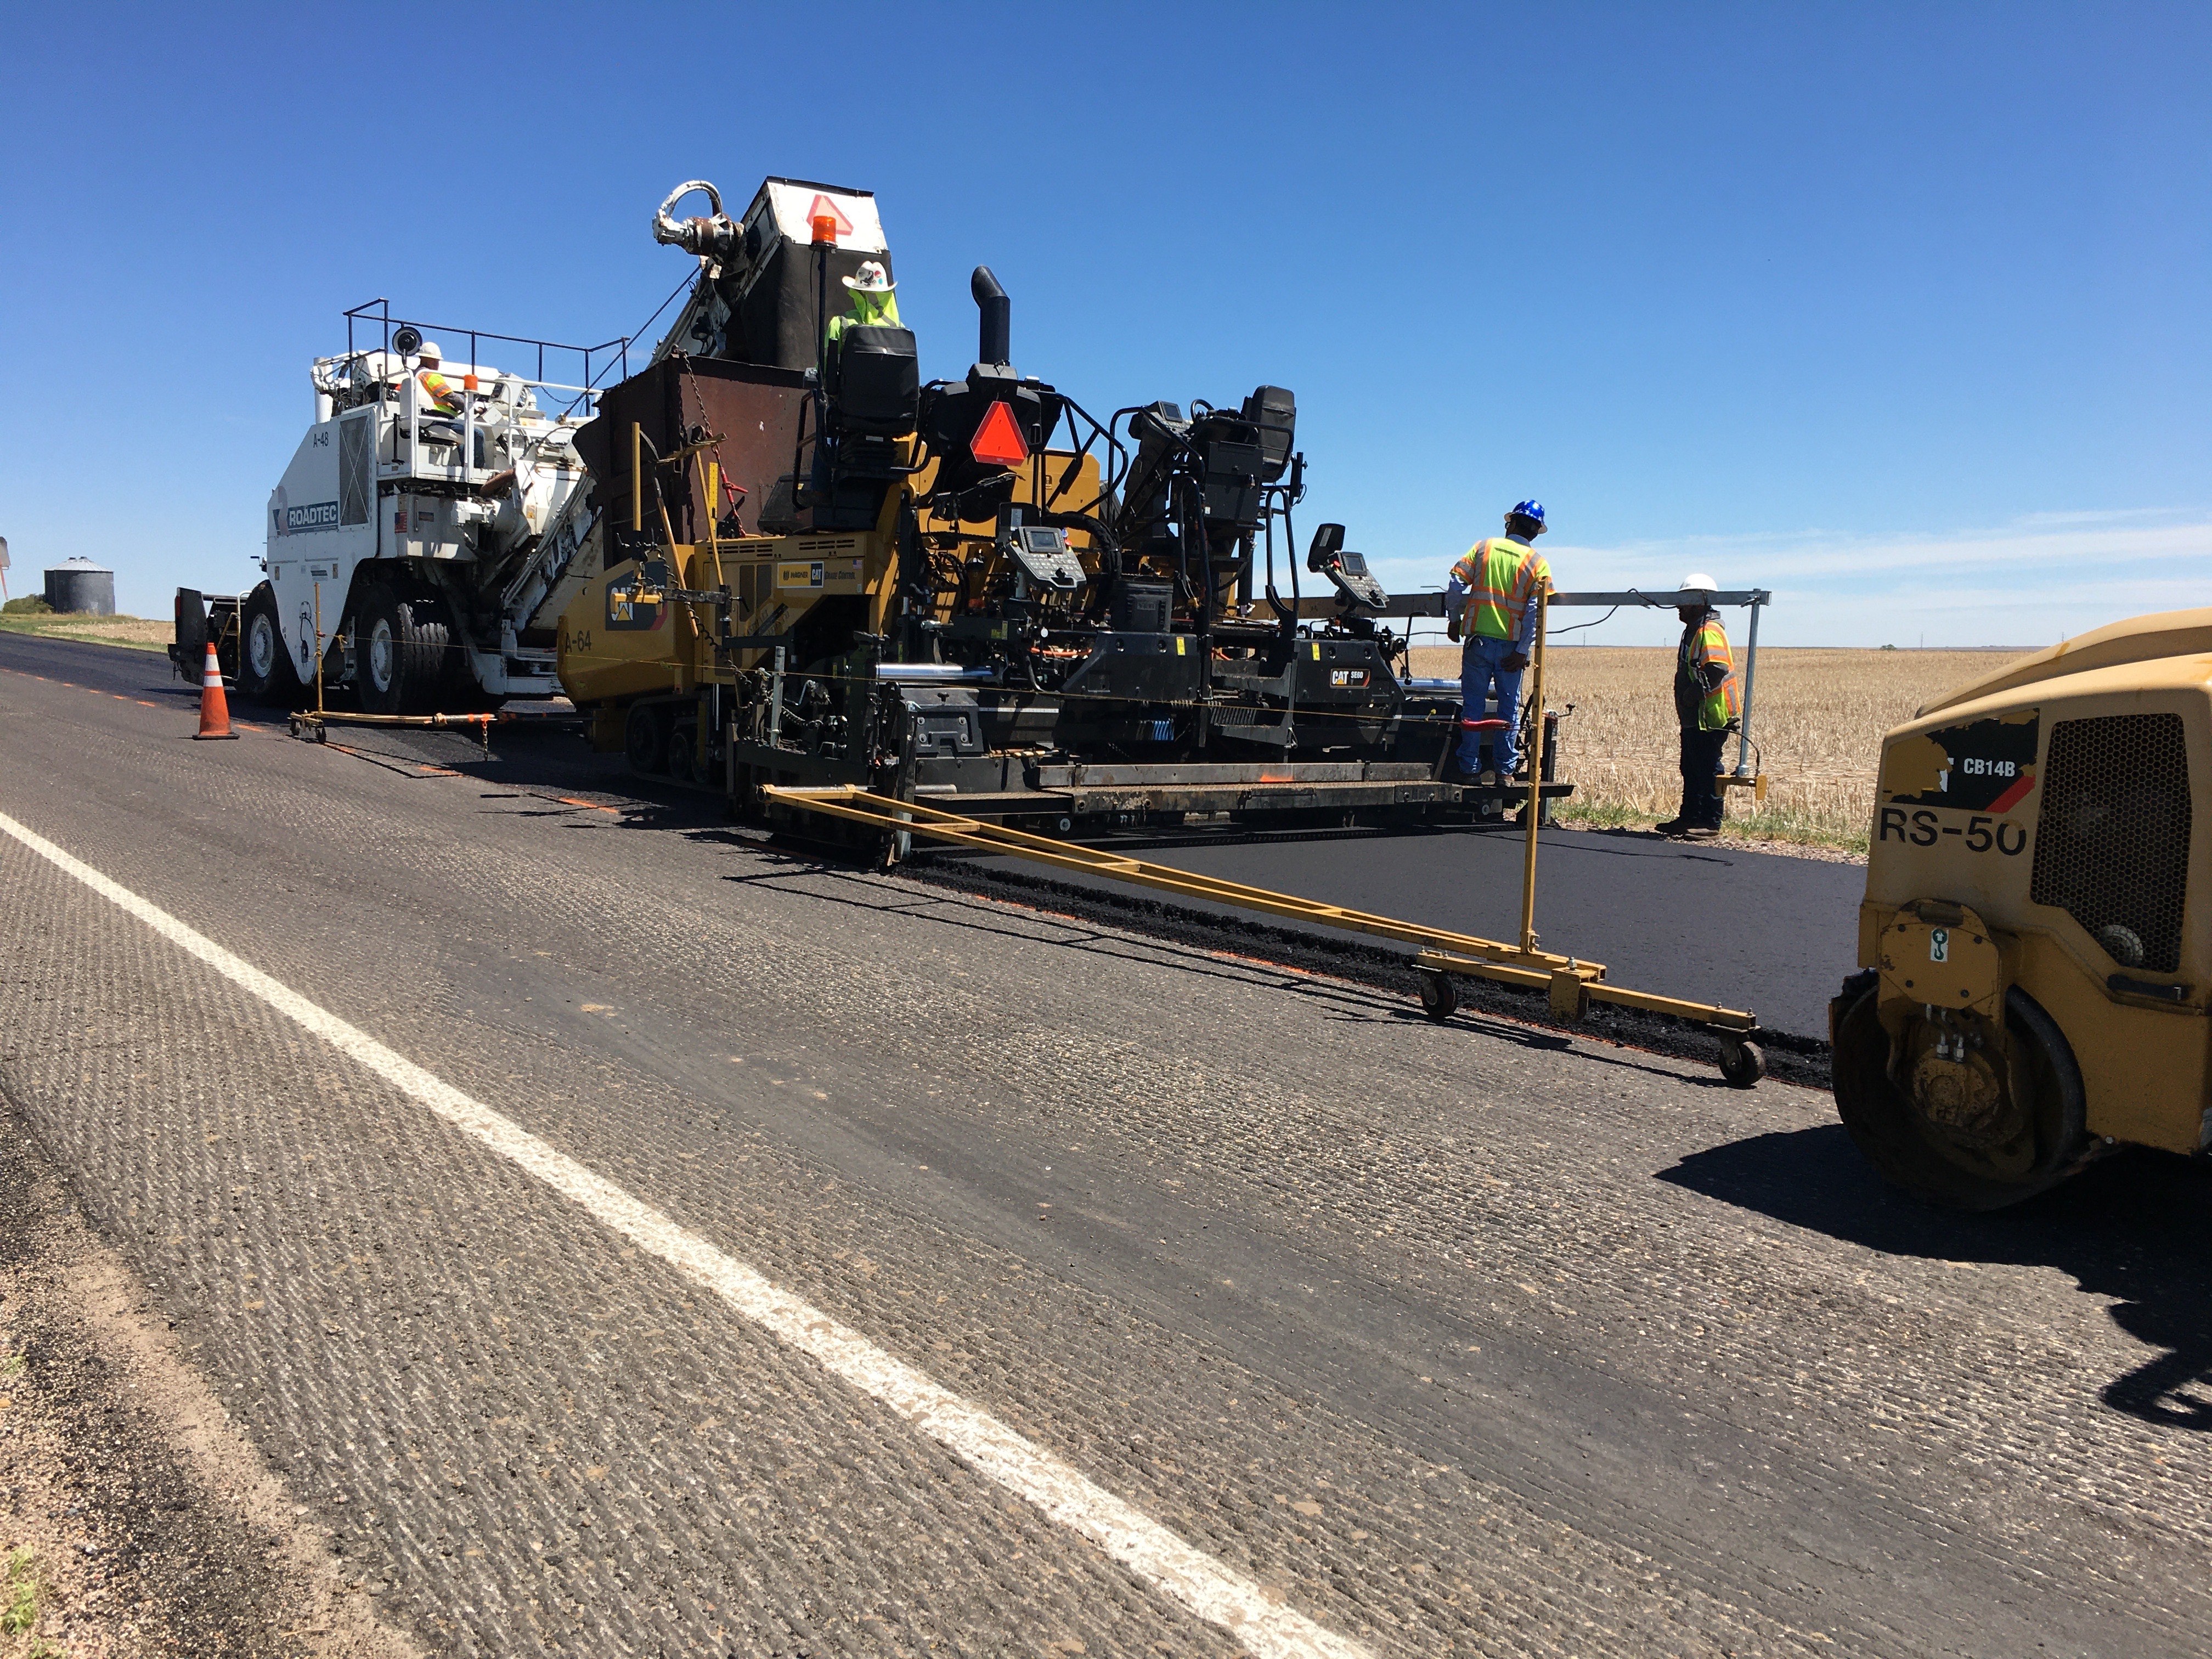 co 79 resurfacing equipment and workers detail image